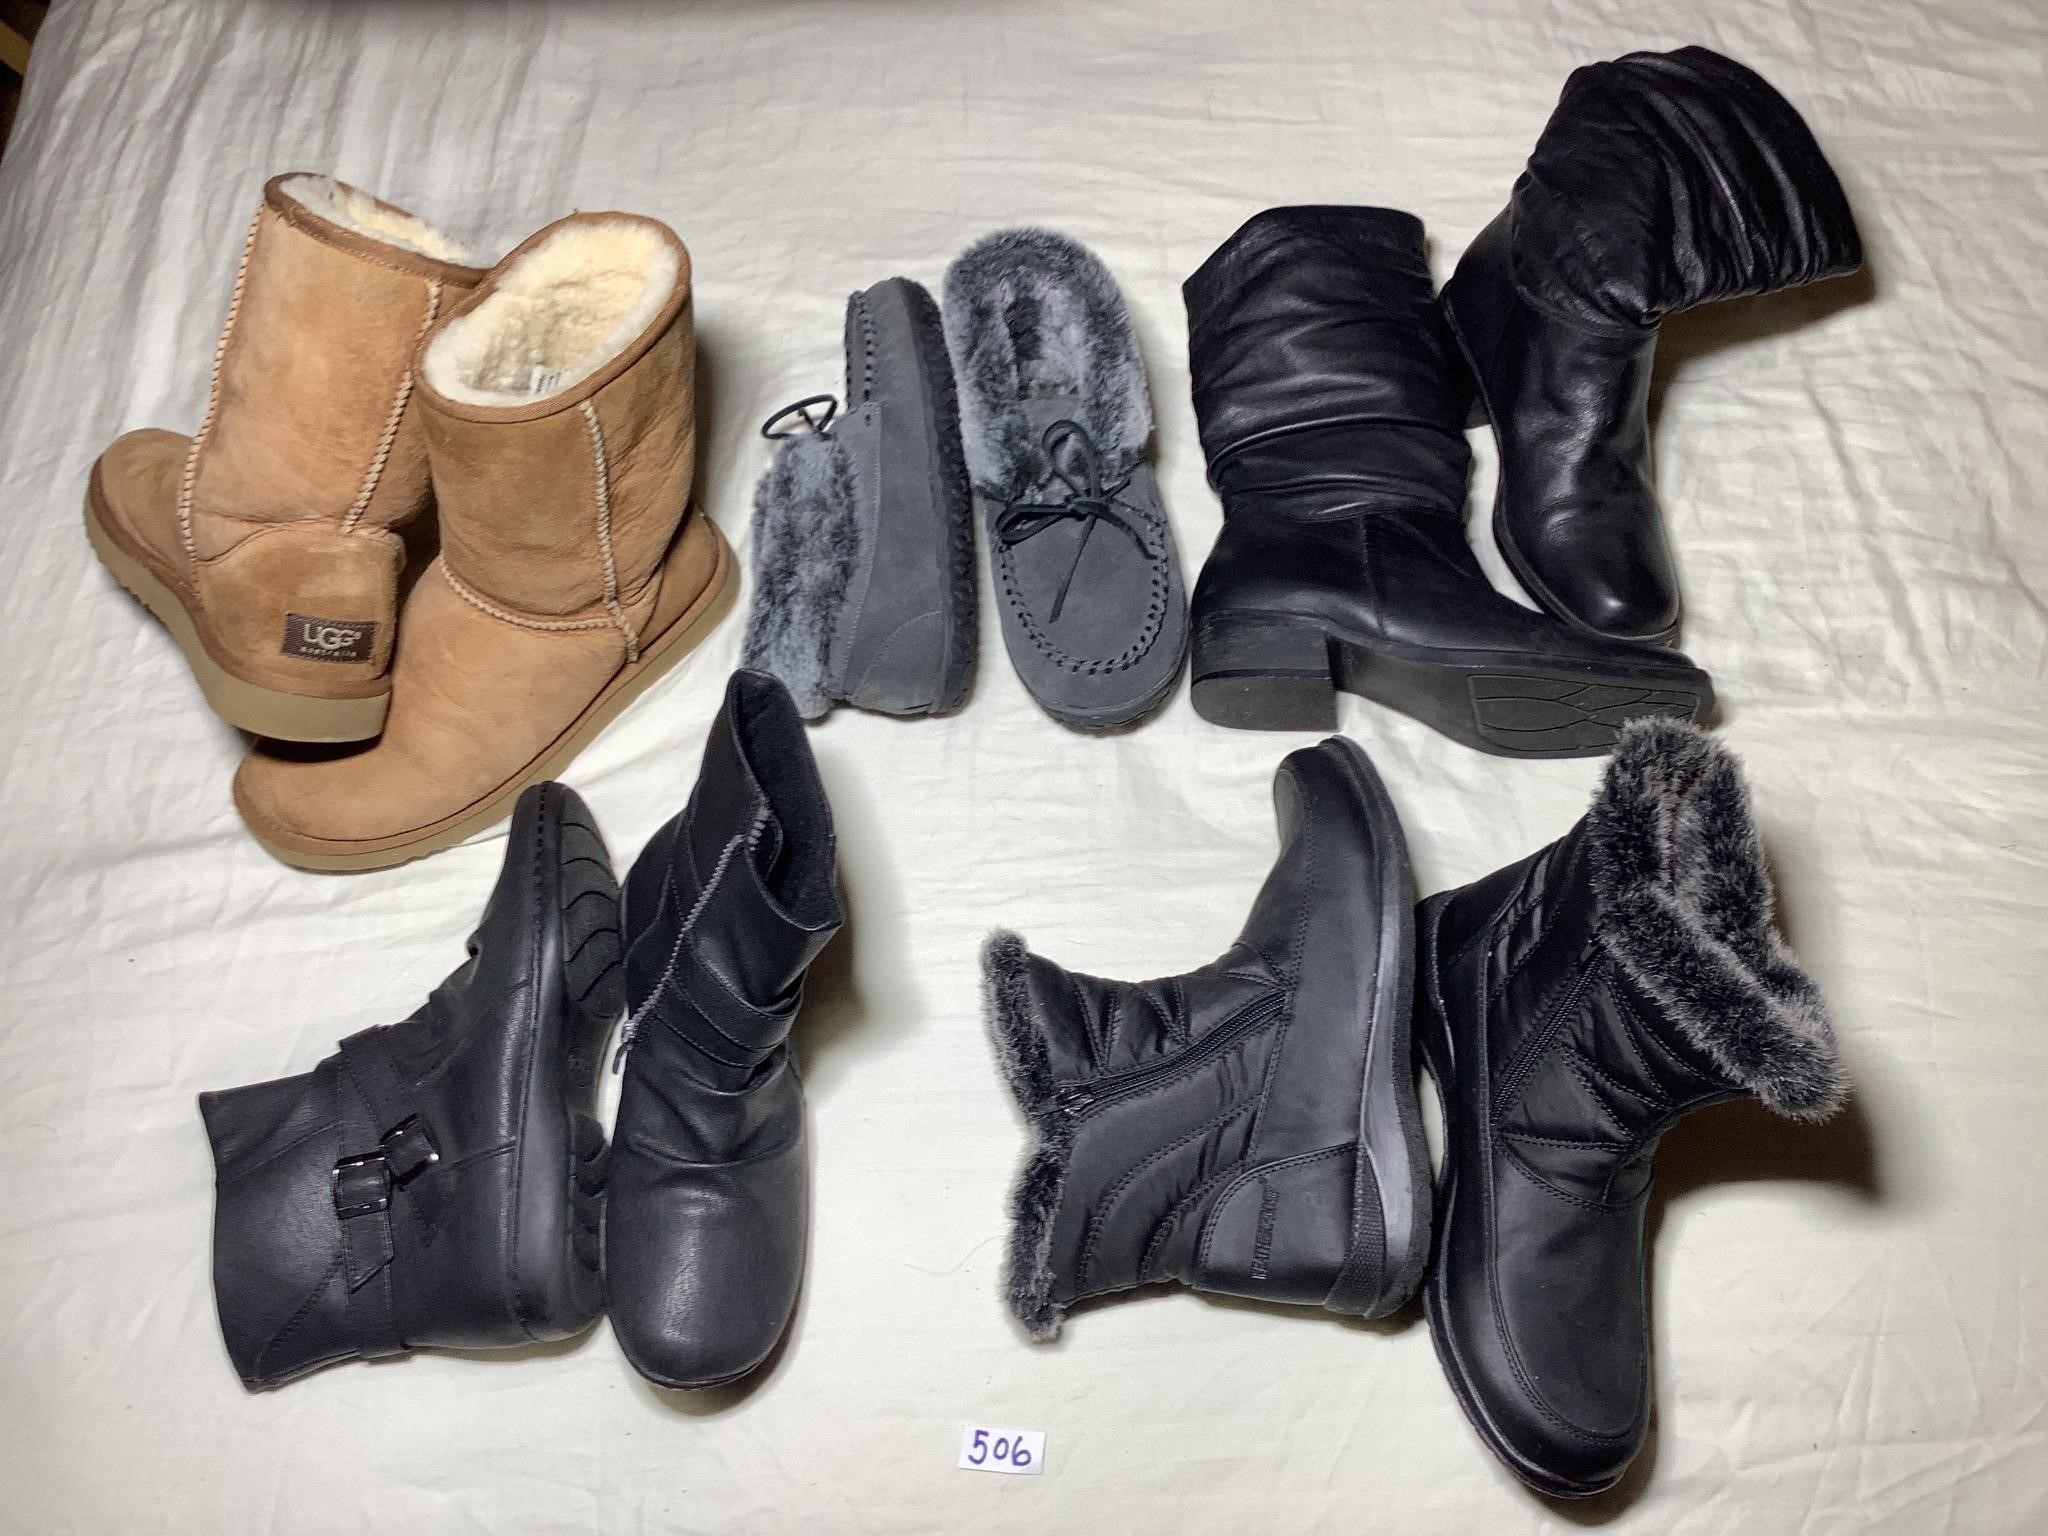 Women’s size 7.5 boots